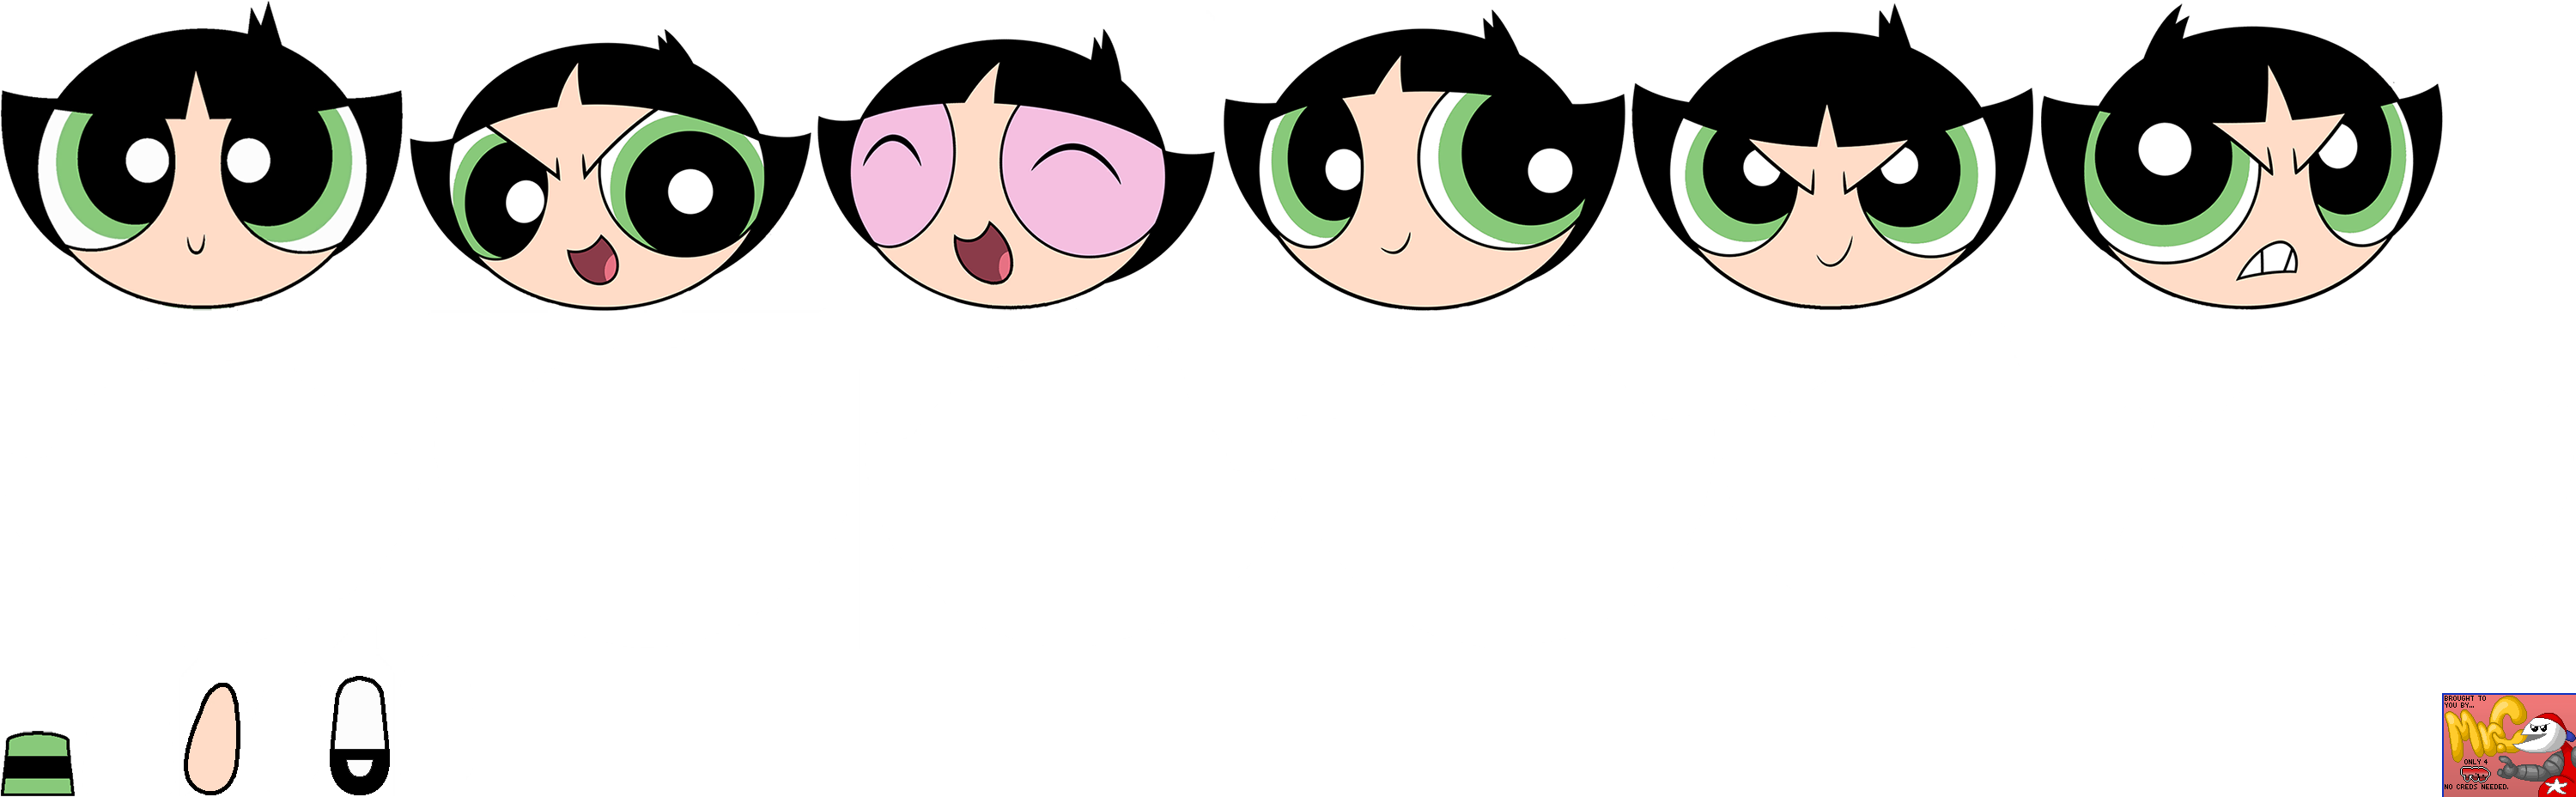 Click For Full Sized Image Buttercup - Powerpuff Girls Story Maker (3000x928), Png Download